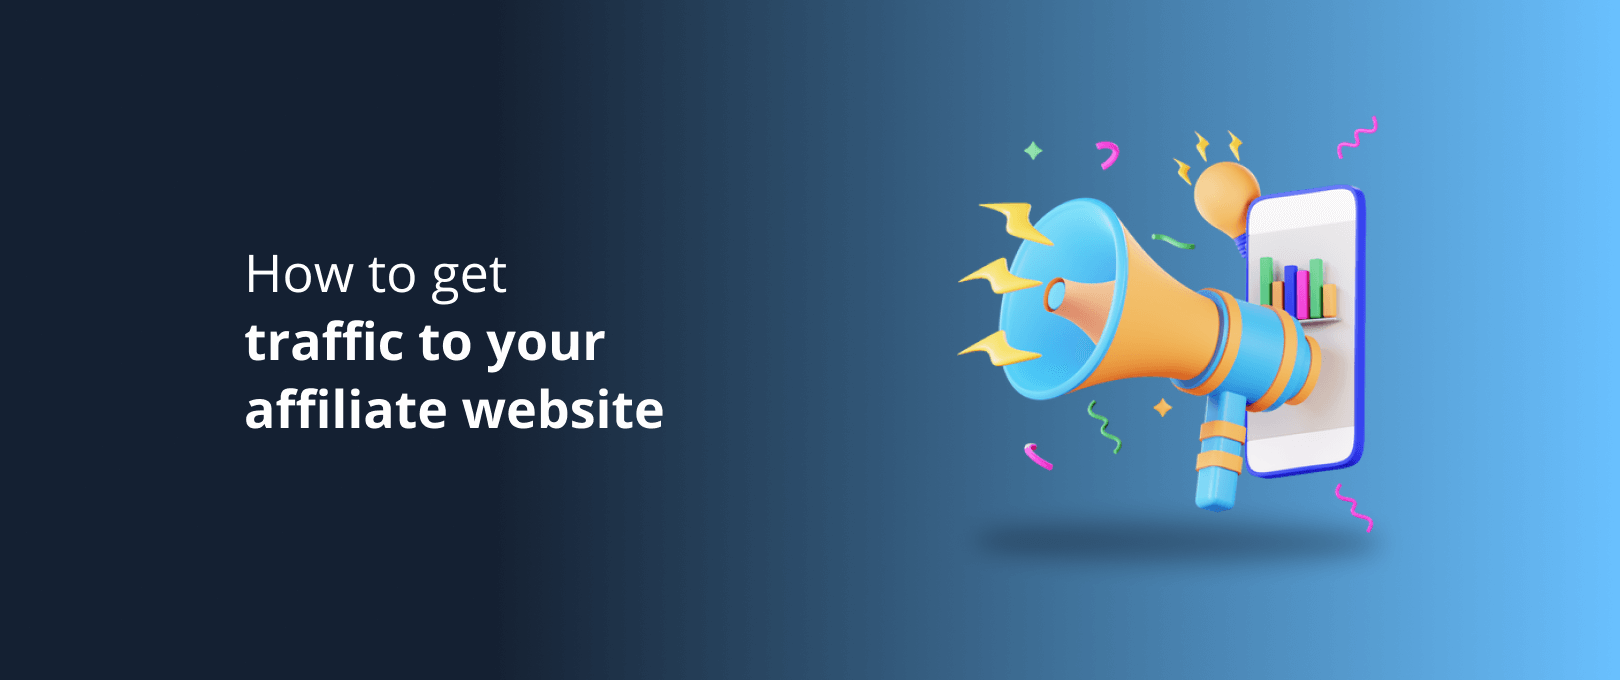 https://devrix.com/wp-content/uploads/2022/11/How-to-get-traffic-to-your-affiliate-website.png